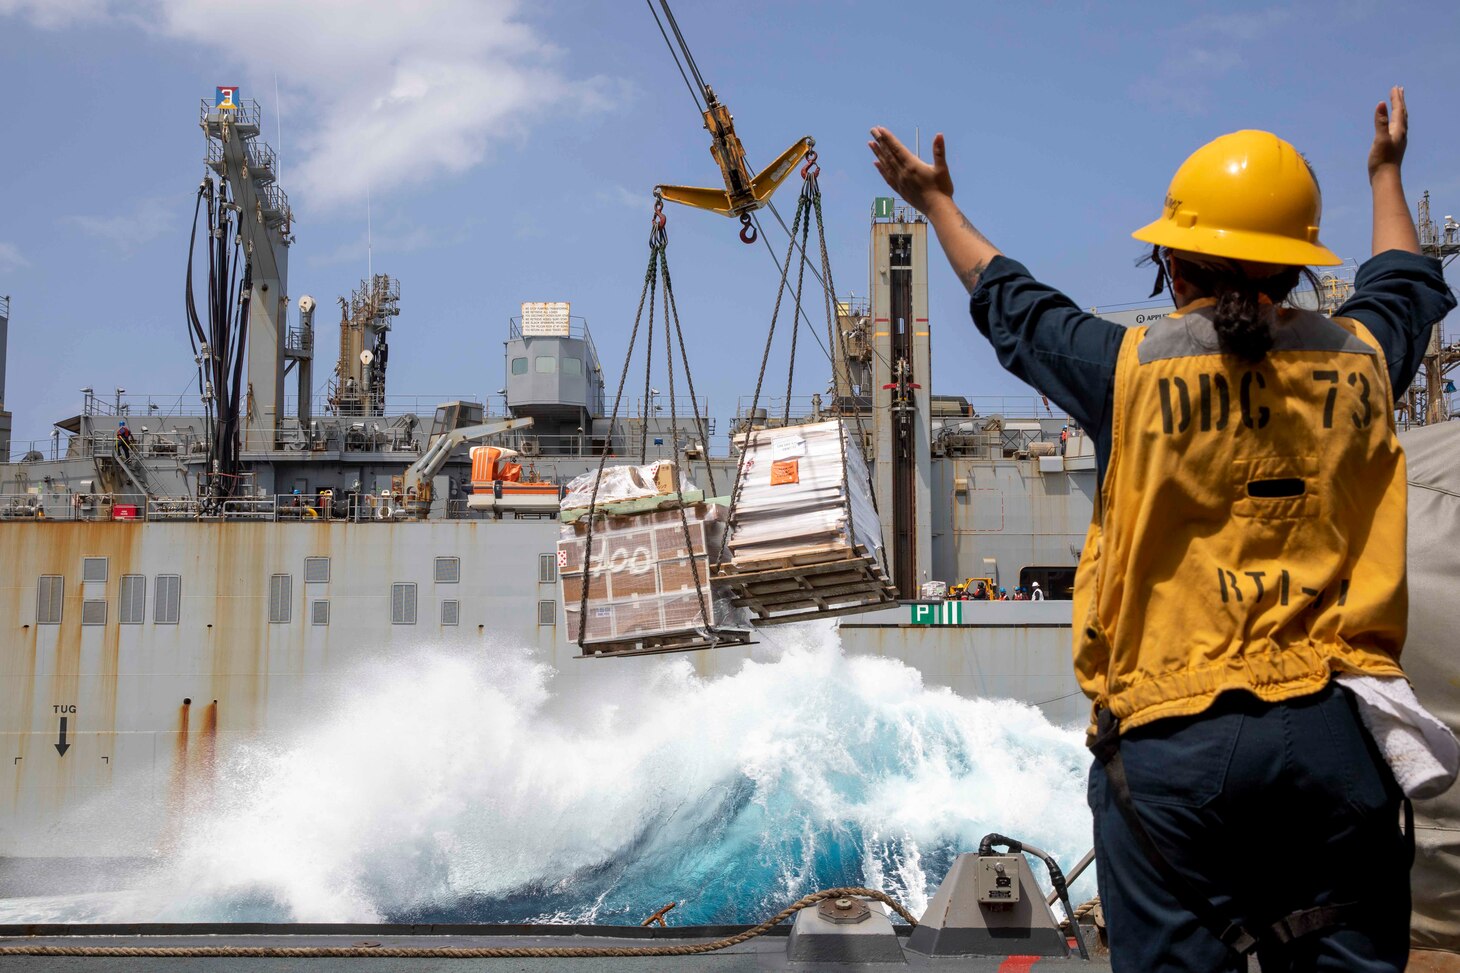 USS Decatur (DDG 73) replenishes from USNS Washington Chambers (T-AKE 11) in the Philippine Sea.